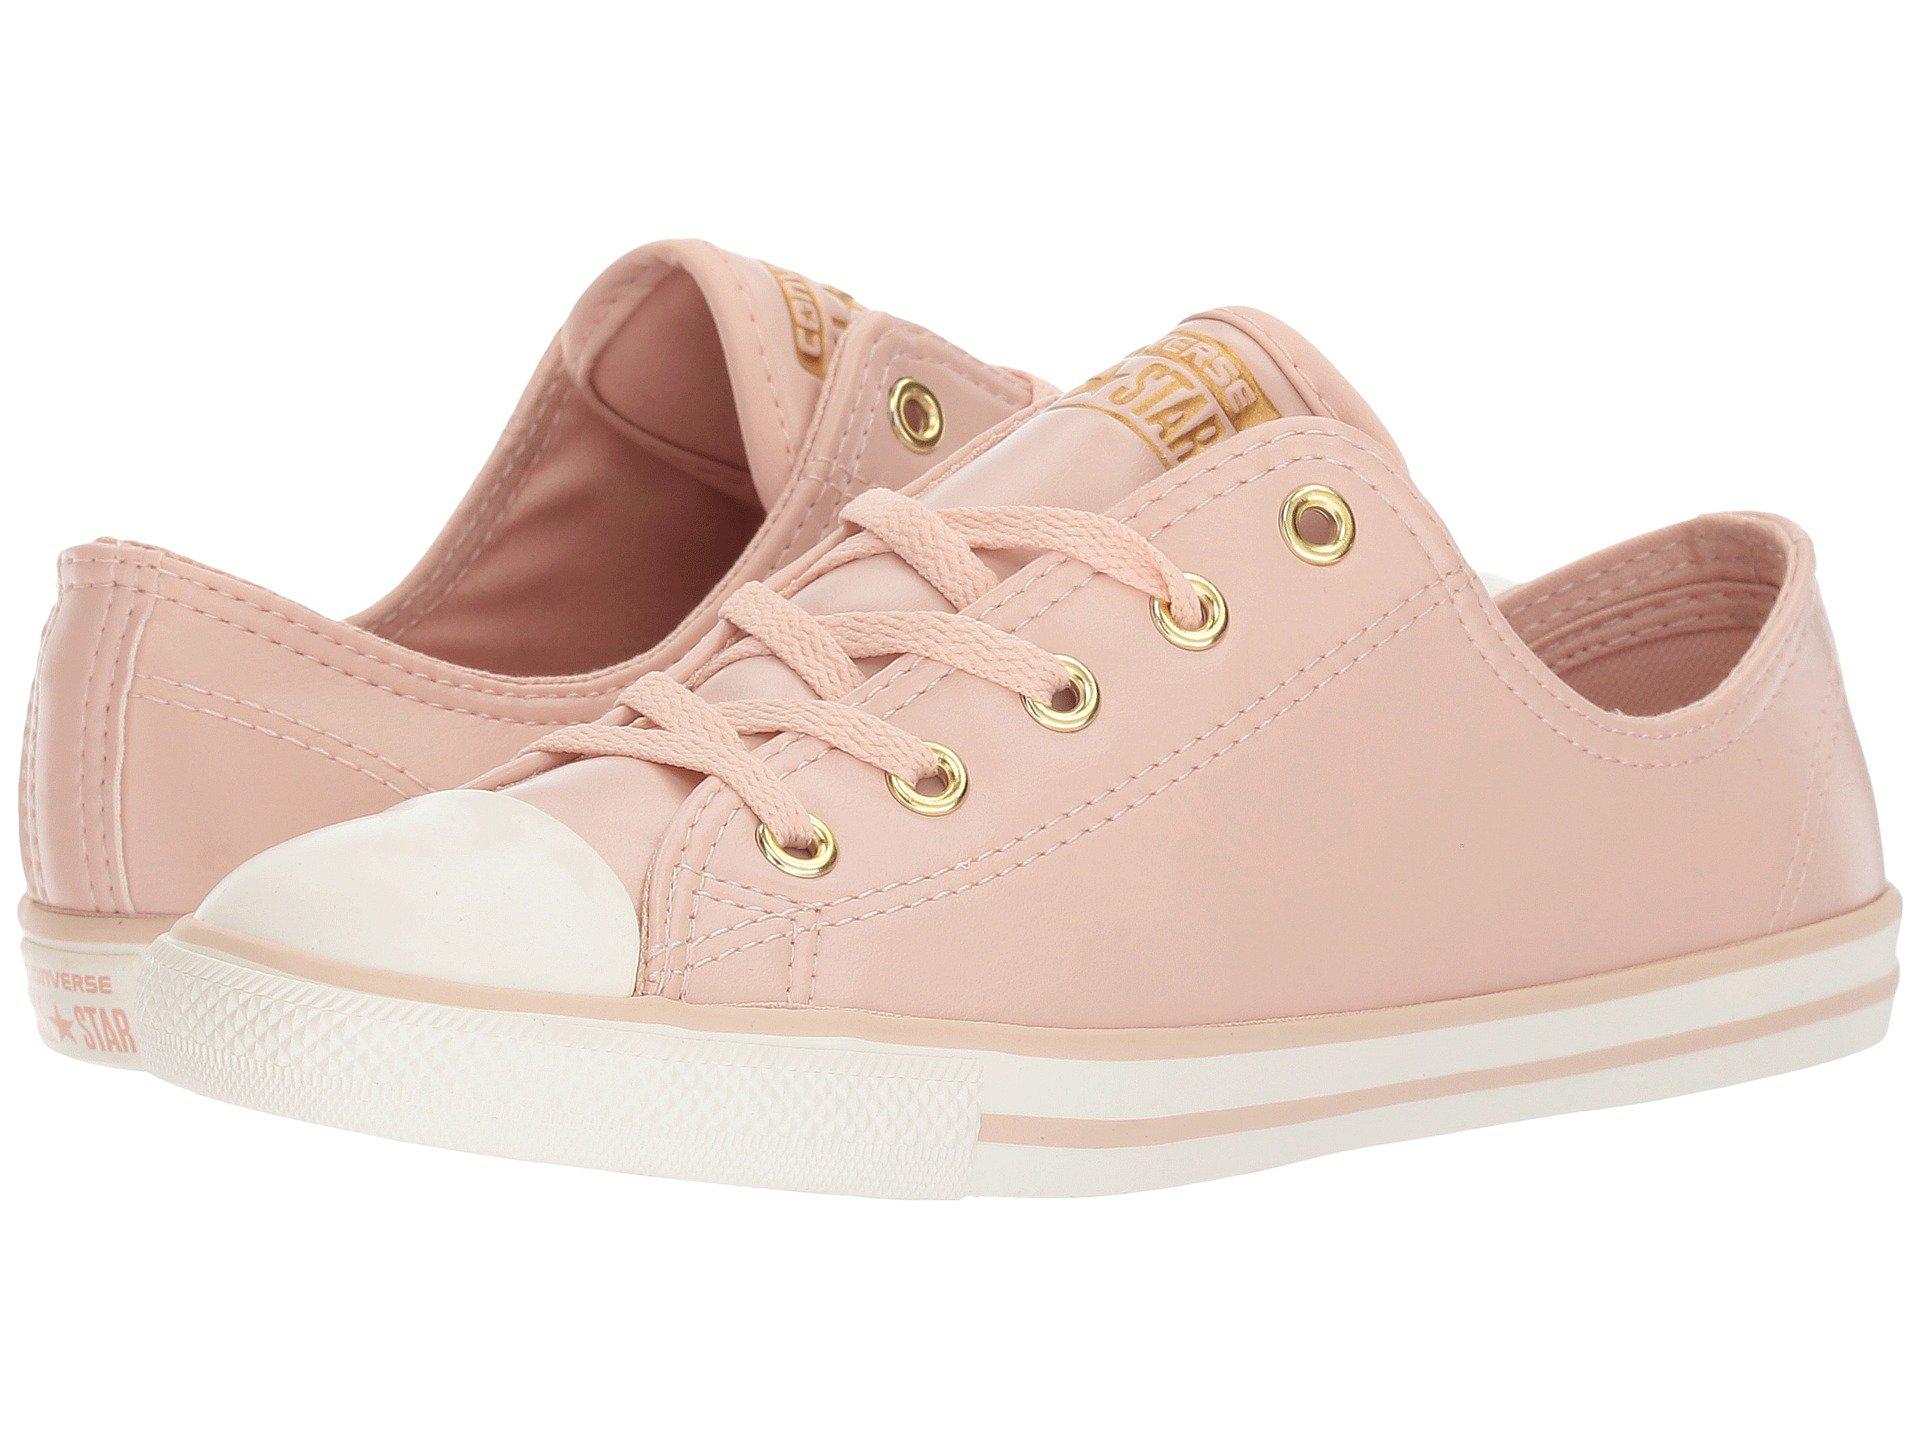 converse chuck taylor all stars dainty ox womens shoes